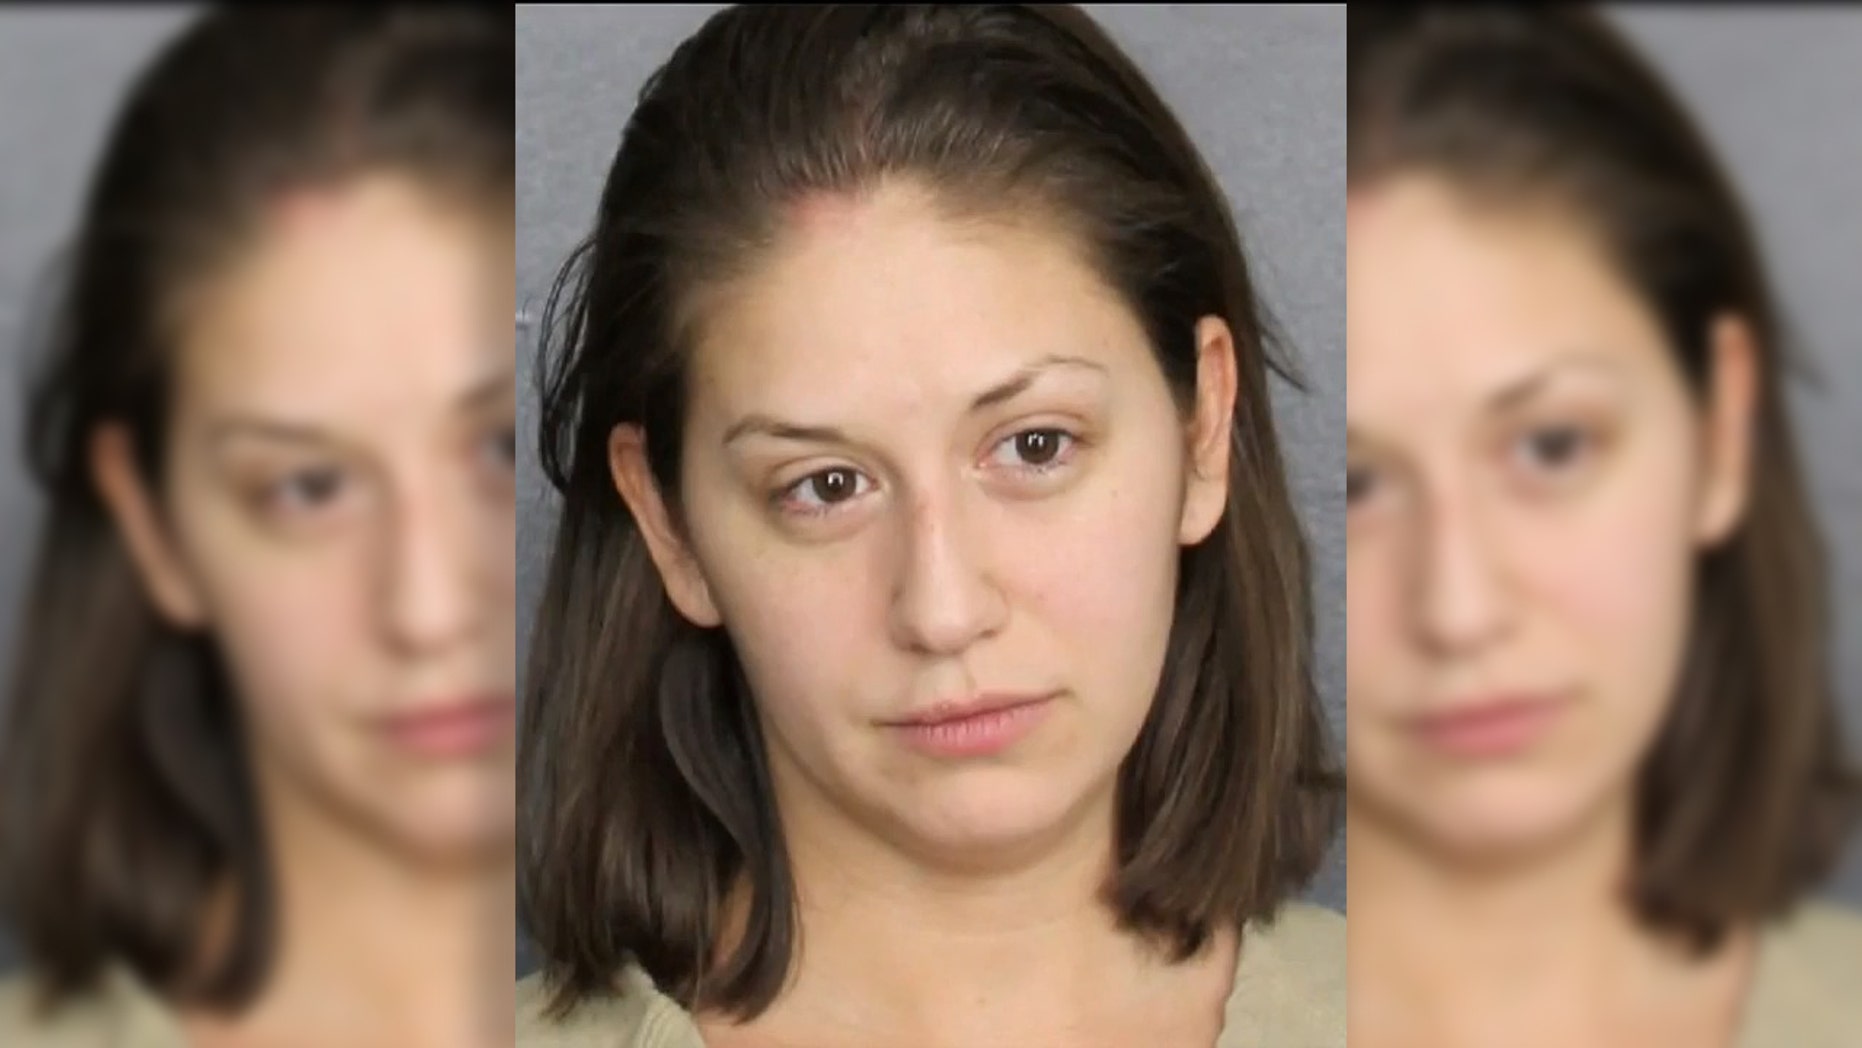 Valerie Gonzalez was reportedly arrested and charged with battery after being removed from the flight.